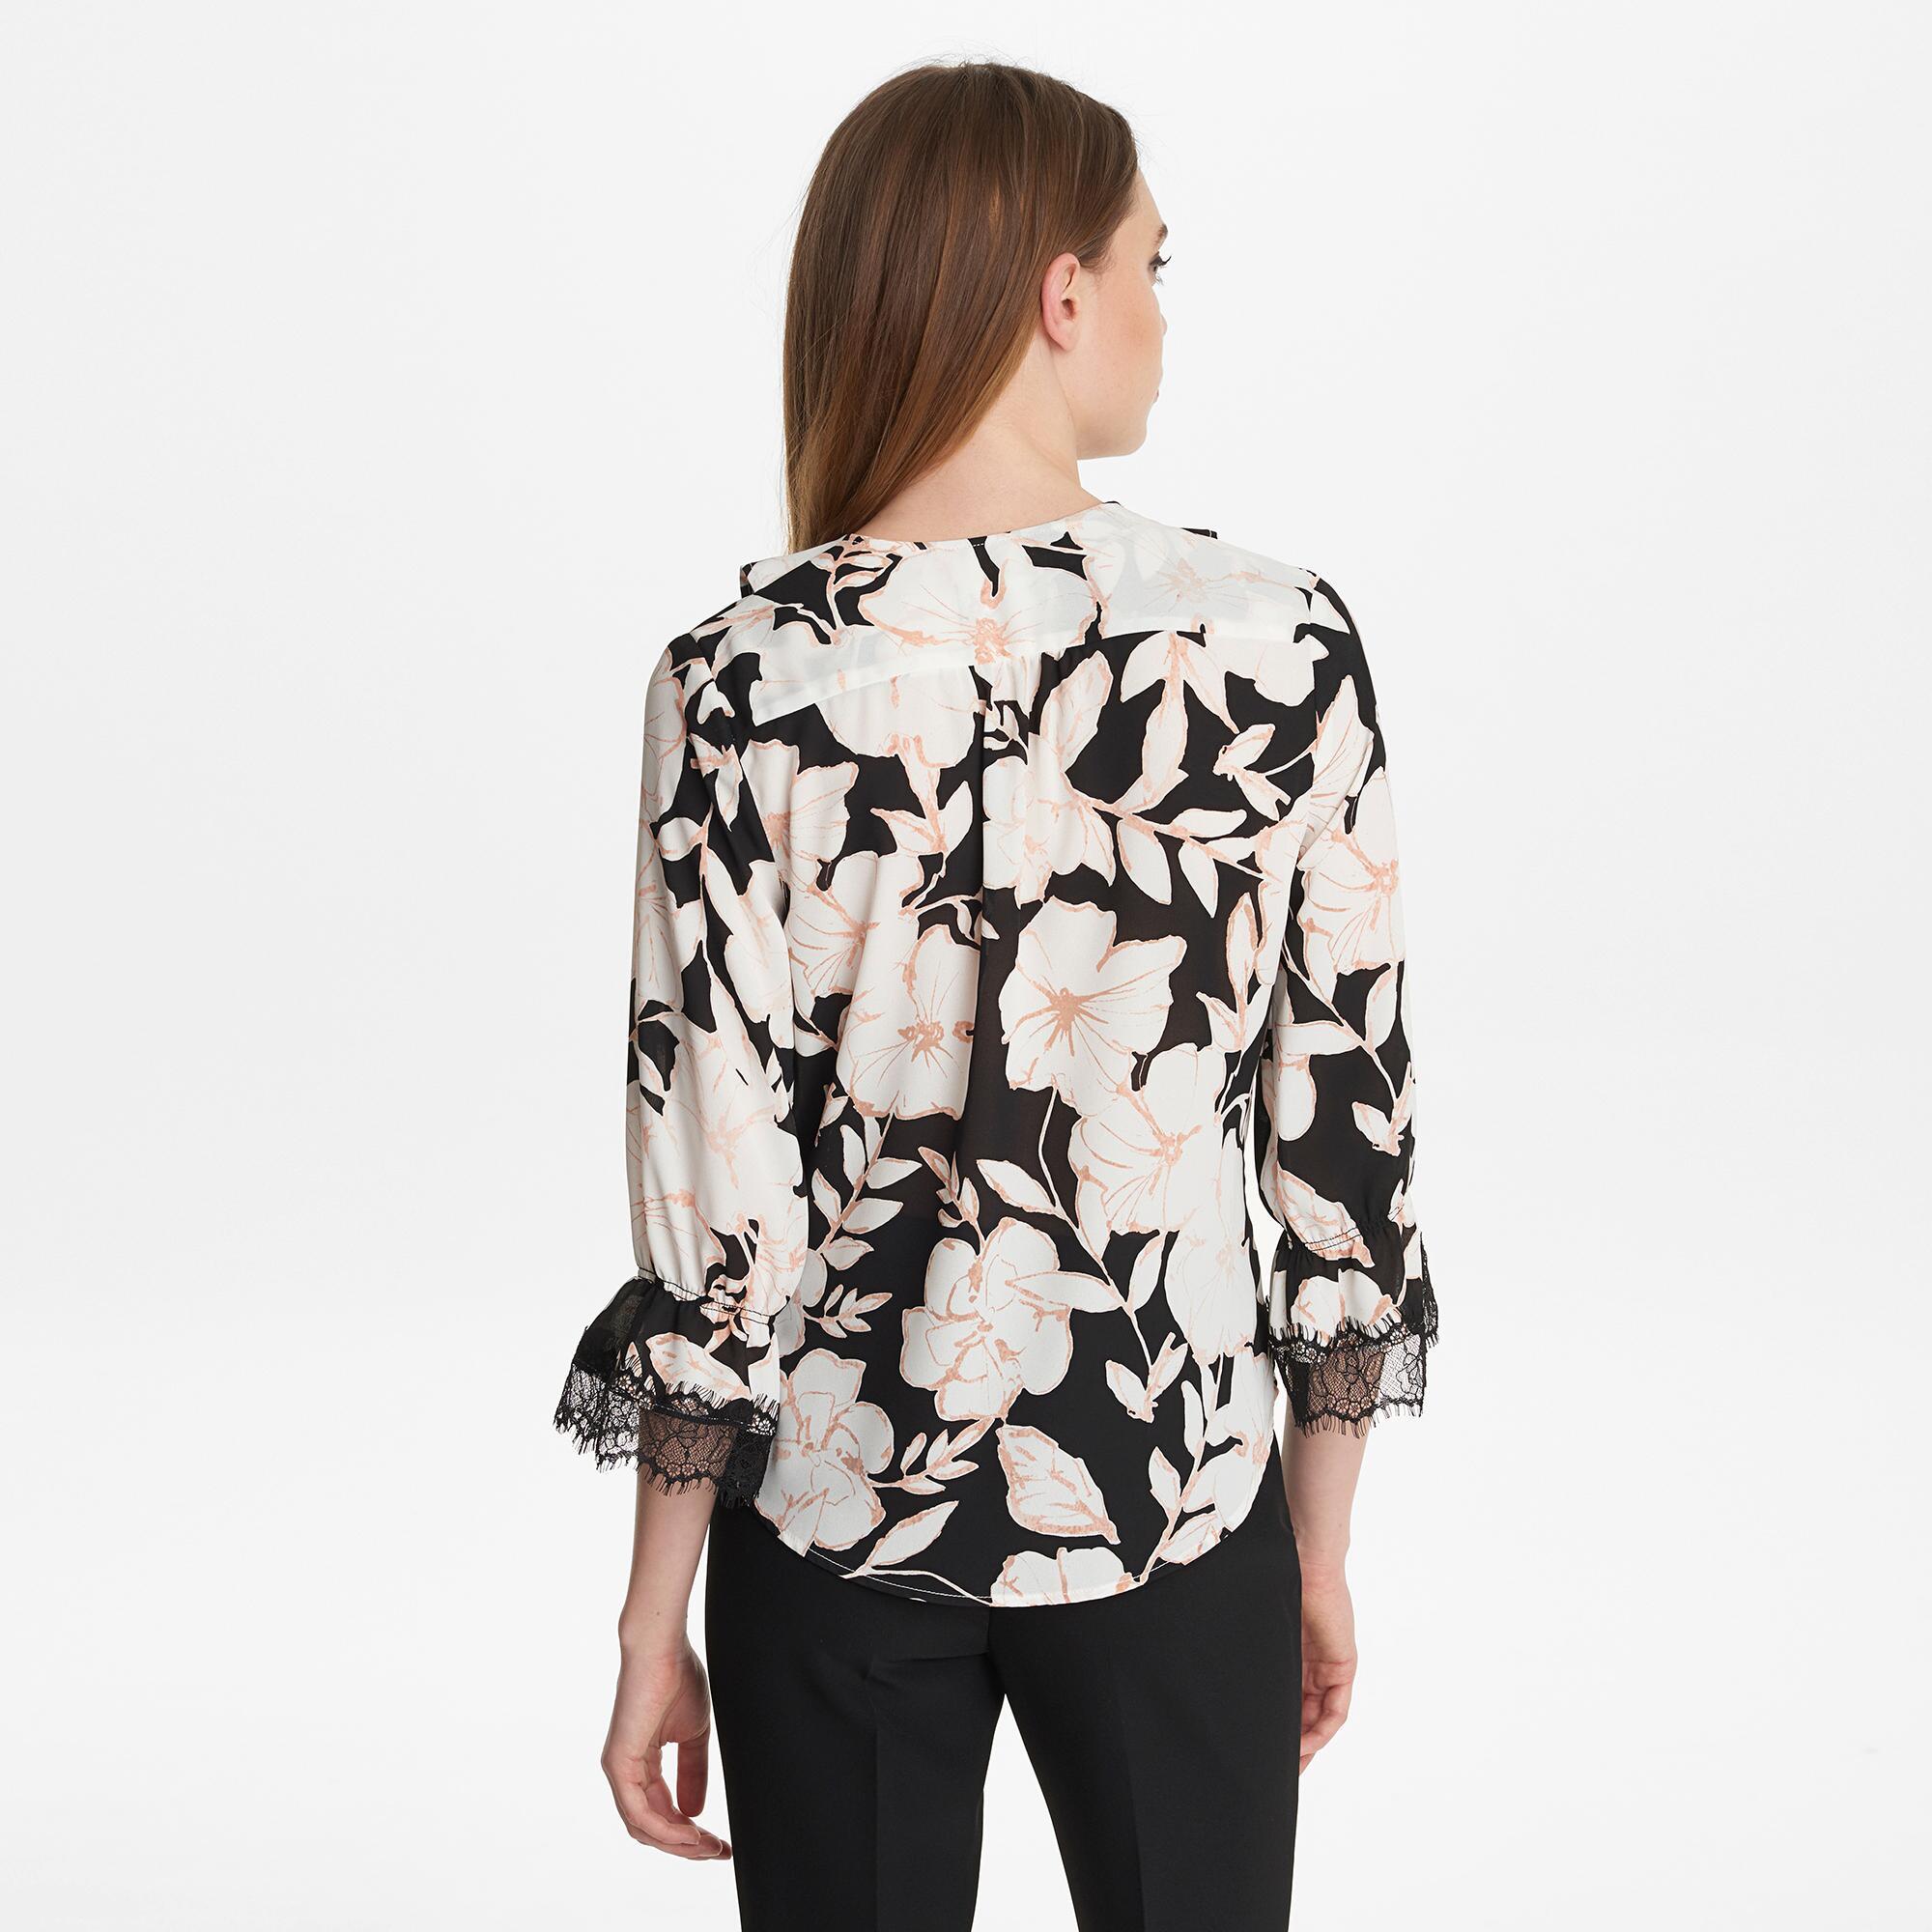 Karl Lagerfeld Floral Printed Ruffle Blouse With Lace in Black - Lyst